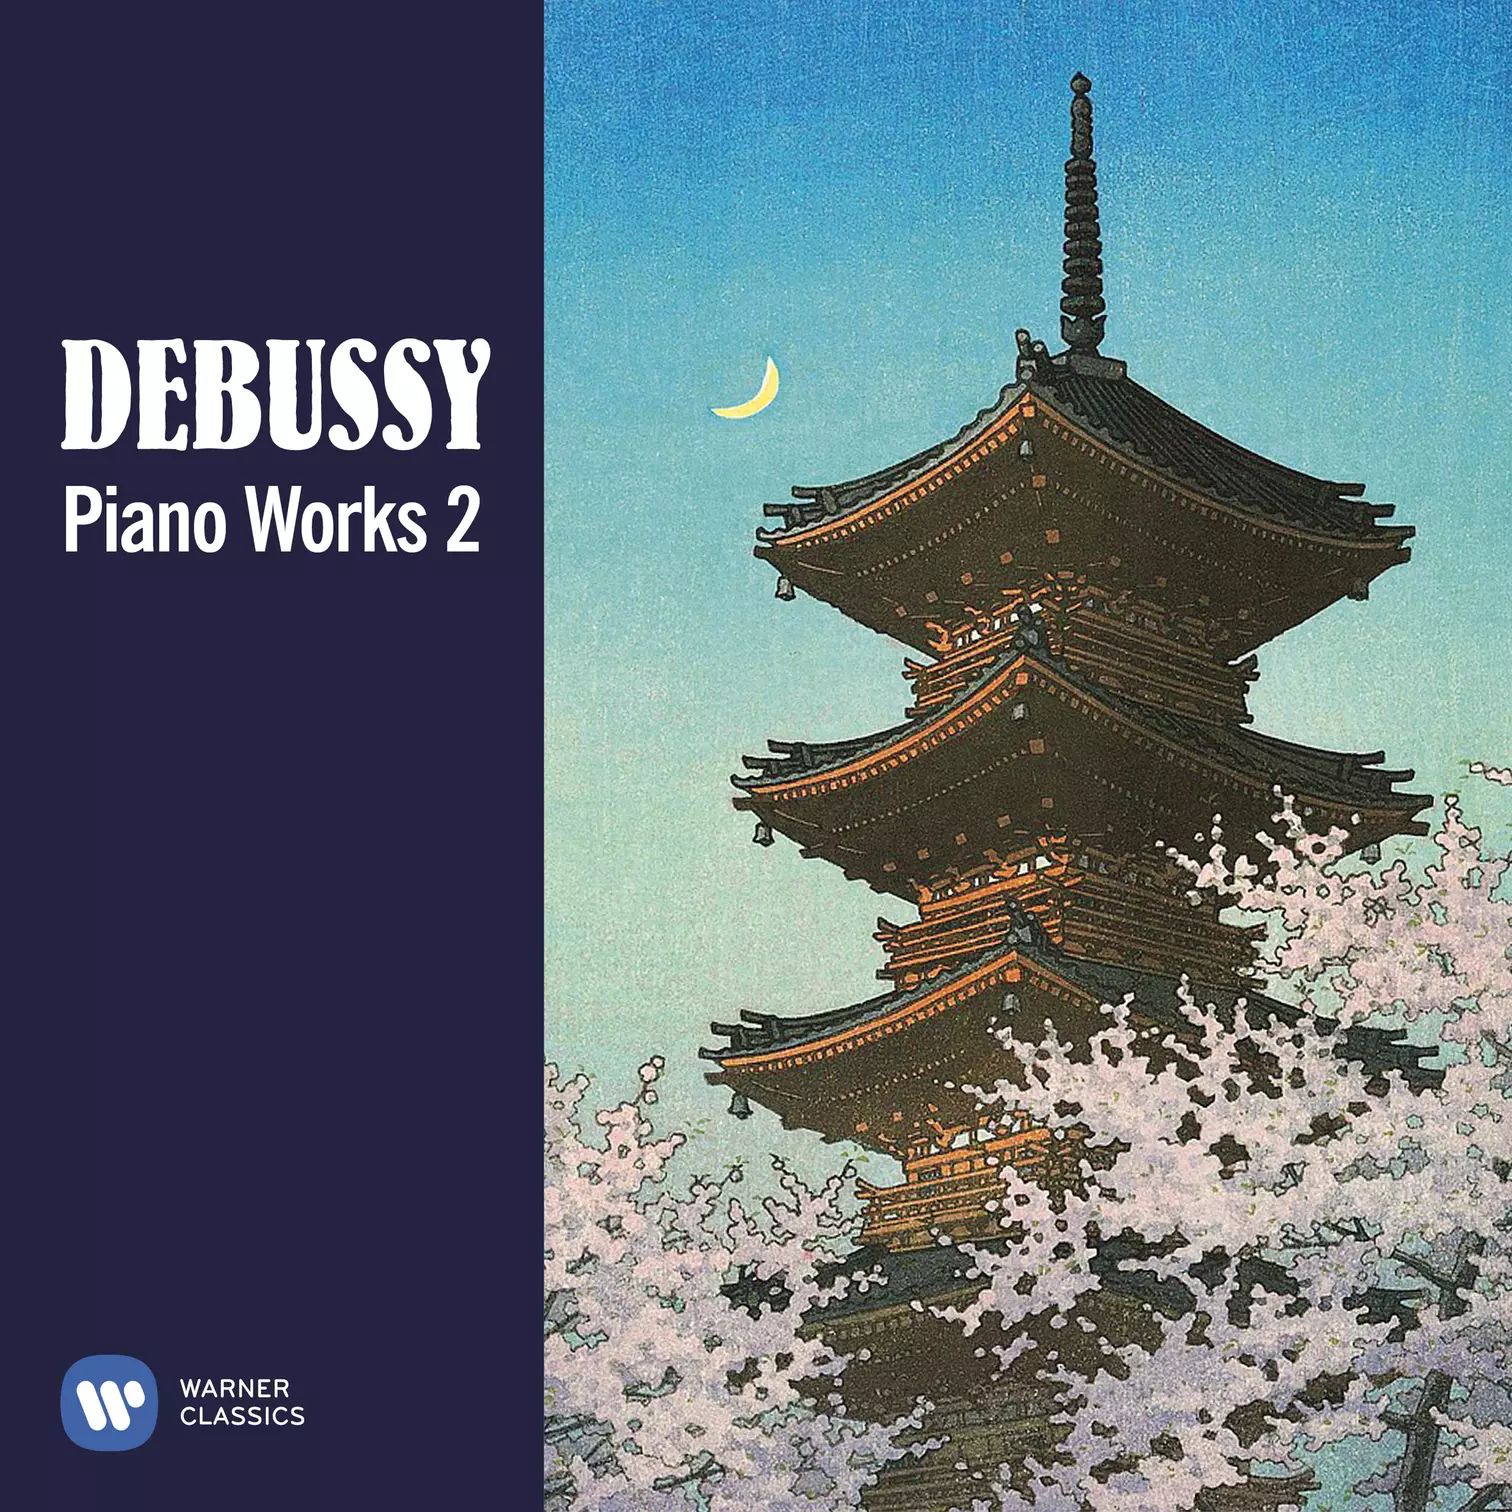 Debussy: Piano Works 2